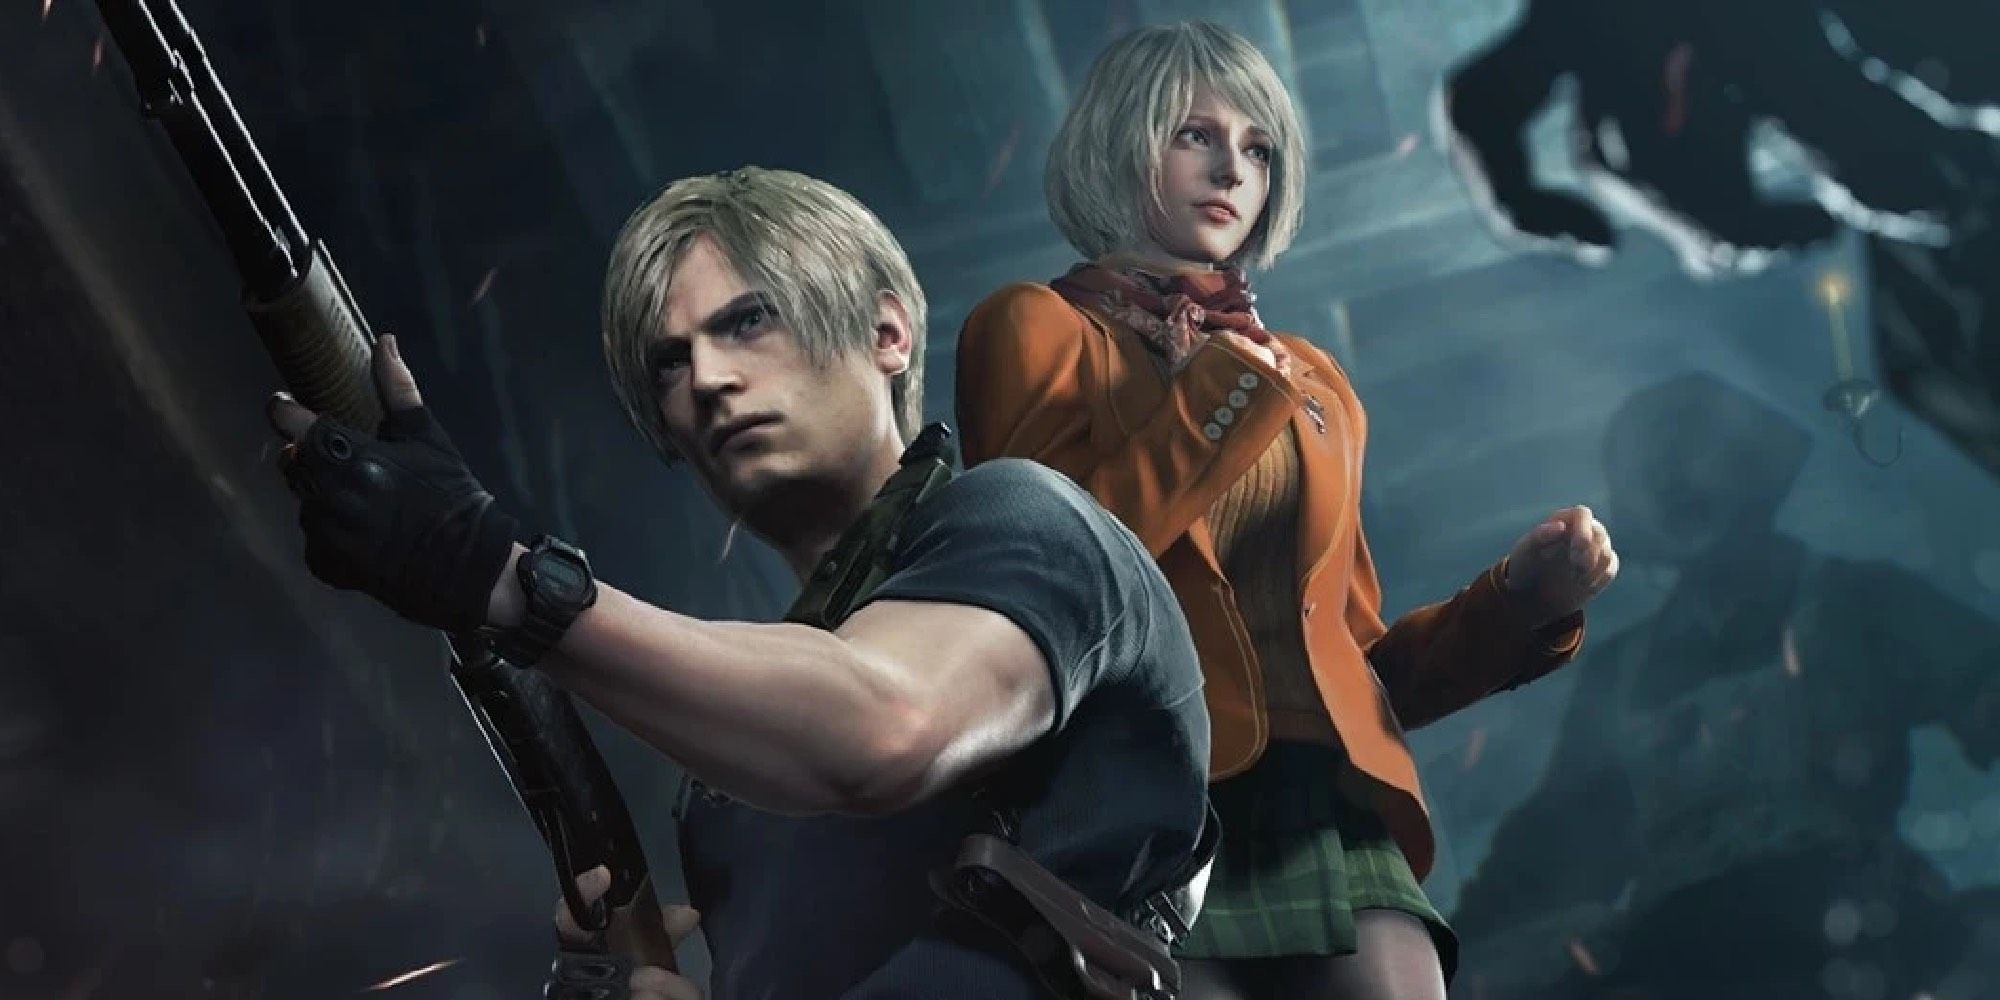 Leon posed in front of Ashley with a gun